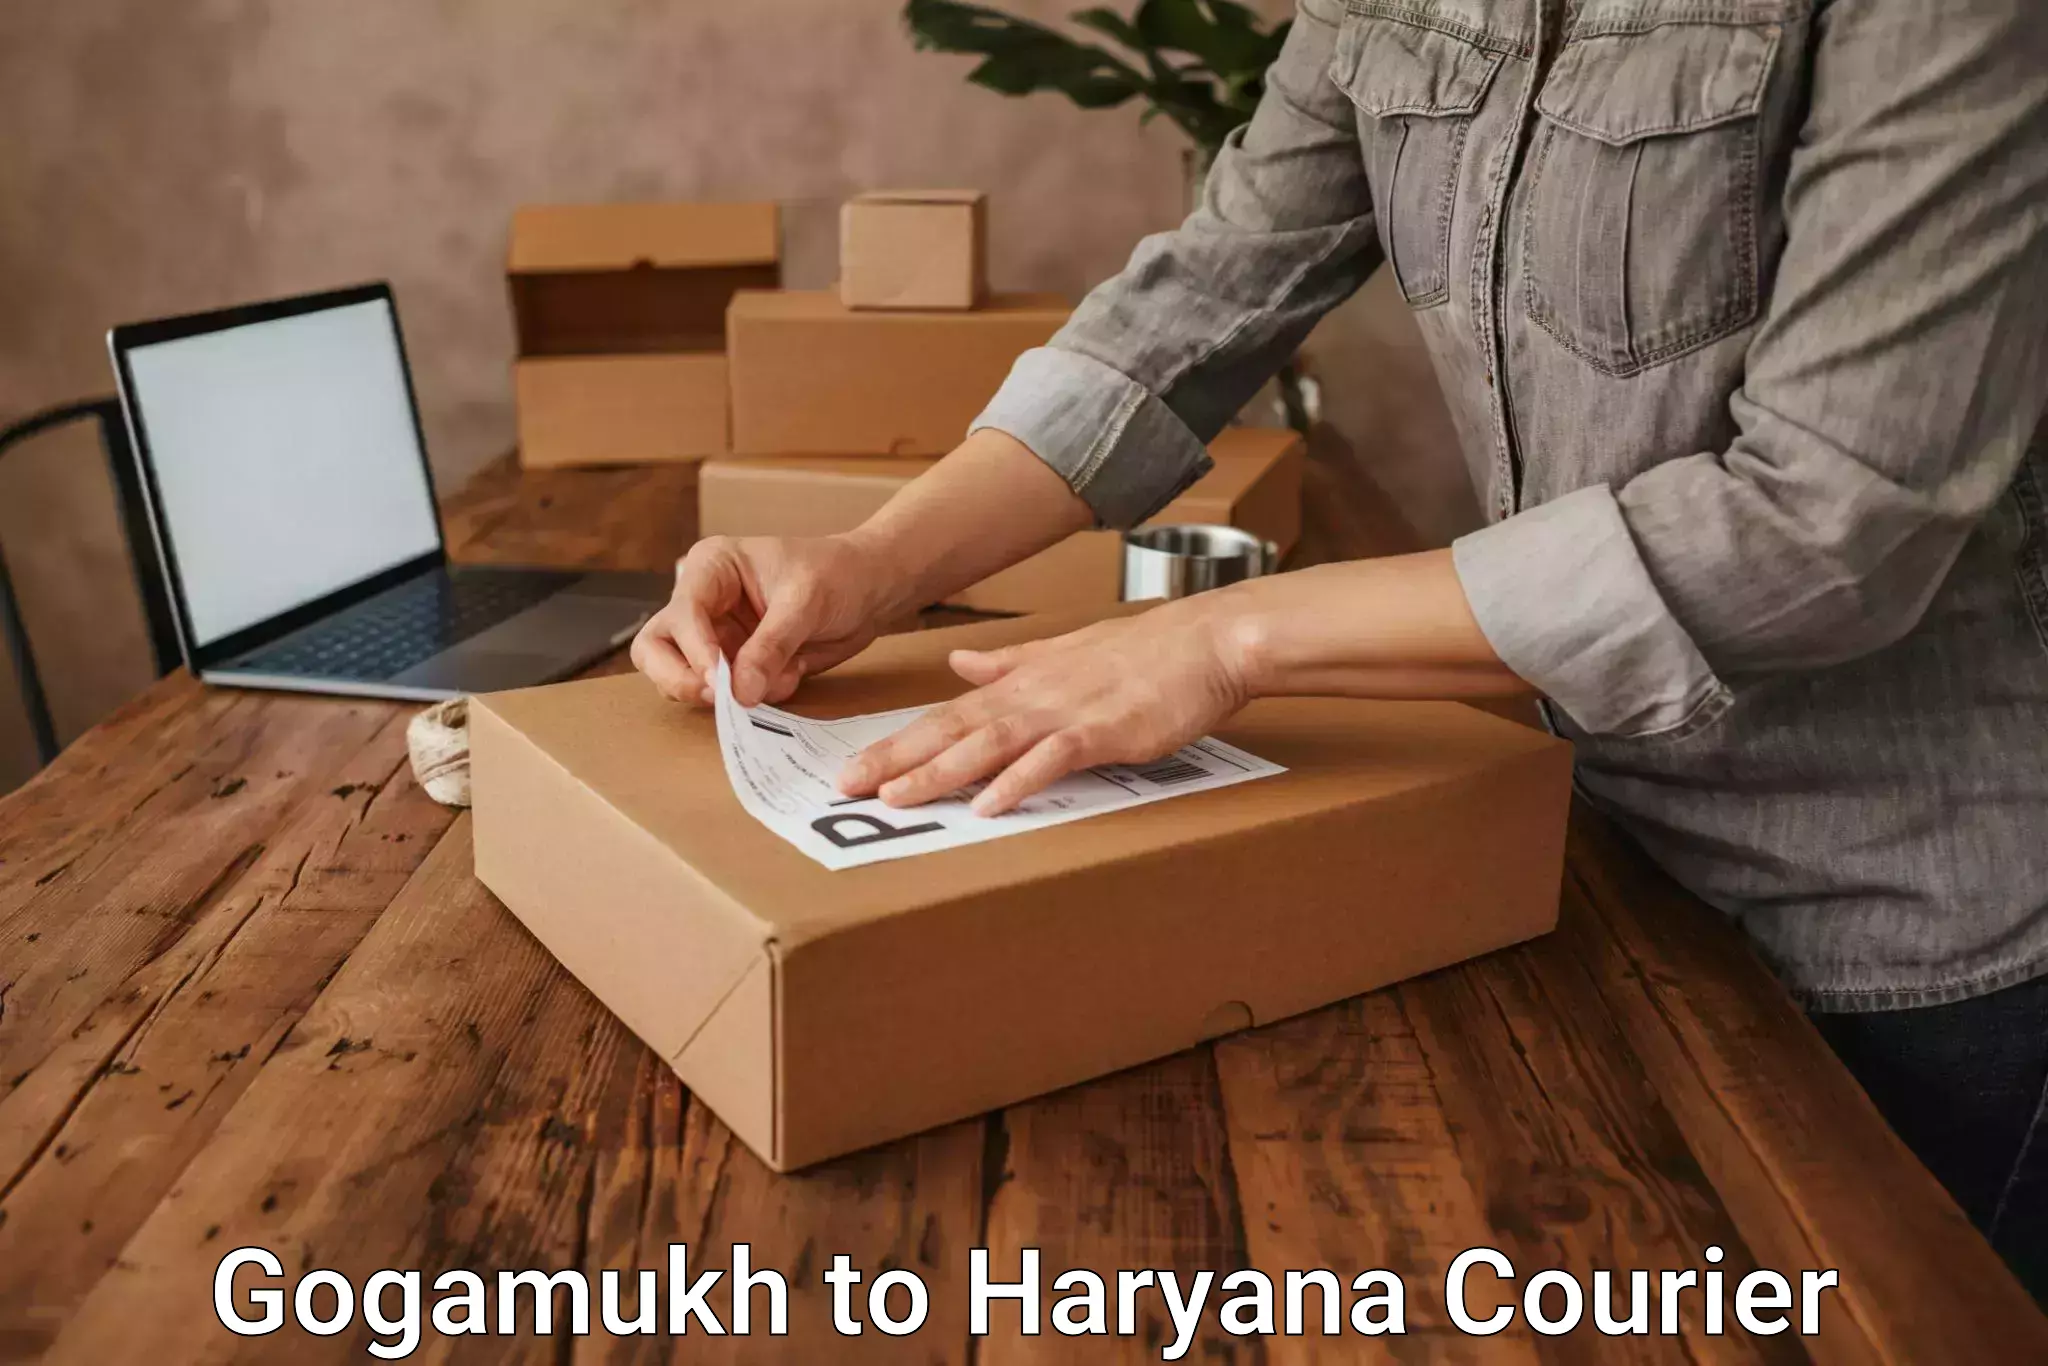 Express package delivery Gogamukh to Gurgaon